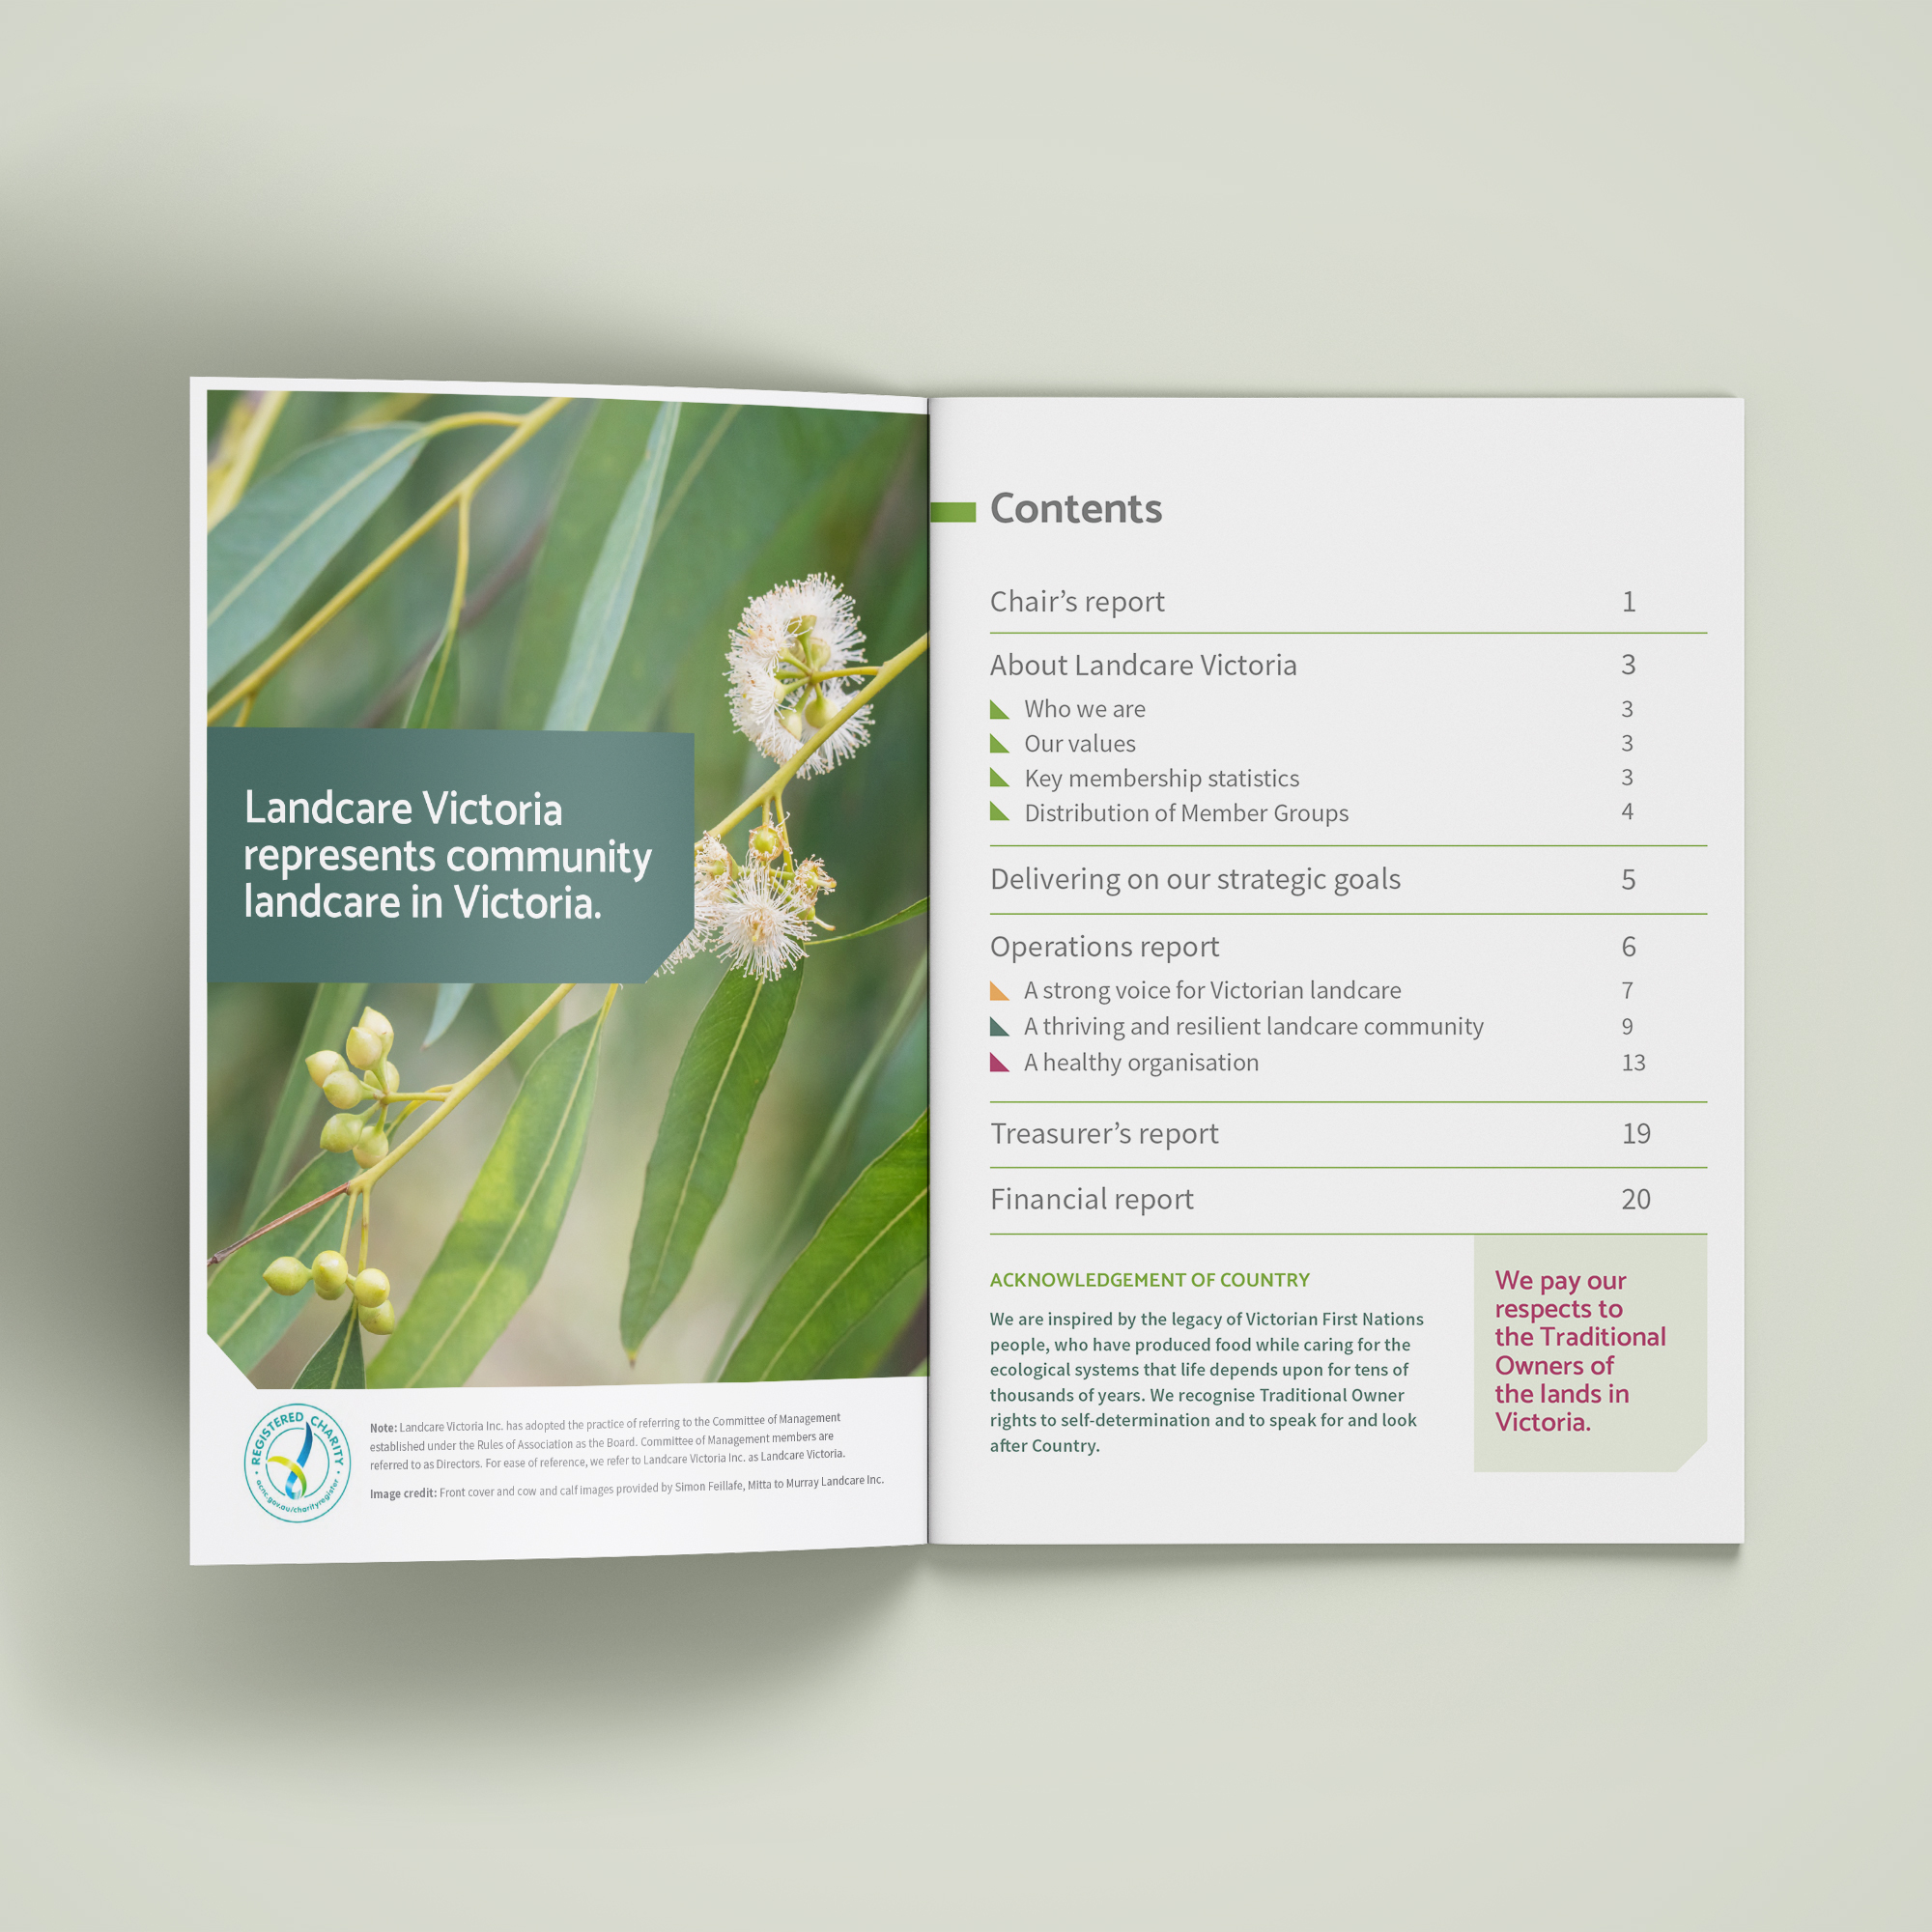 Full colour mockup of Landcare Victoria's 2024 Annual Report 'contents' spread on a light grey green background. The image on the left page features a close up of flowering eucalyptus leaves and the call-out text reads “Landcare Victoria supports community landcare in Victoria”. The right hand page displays the contents of the report in a list format with relevant sections and page numbers.